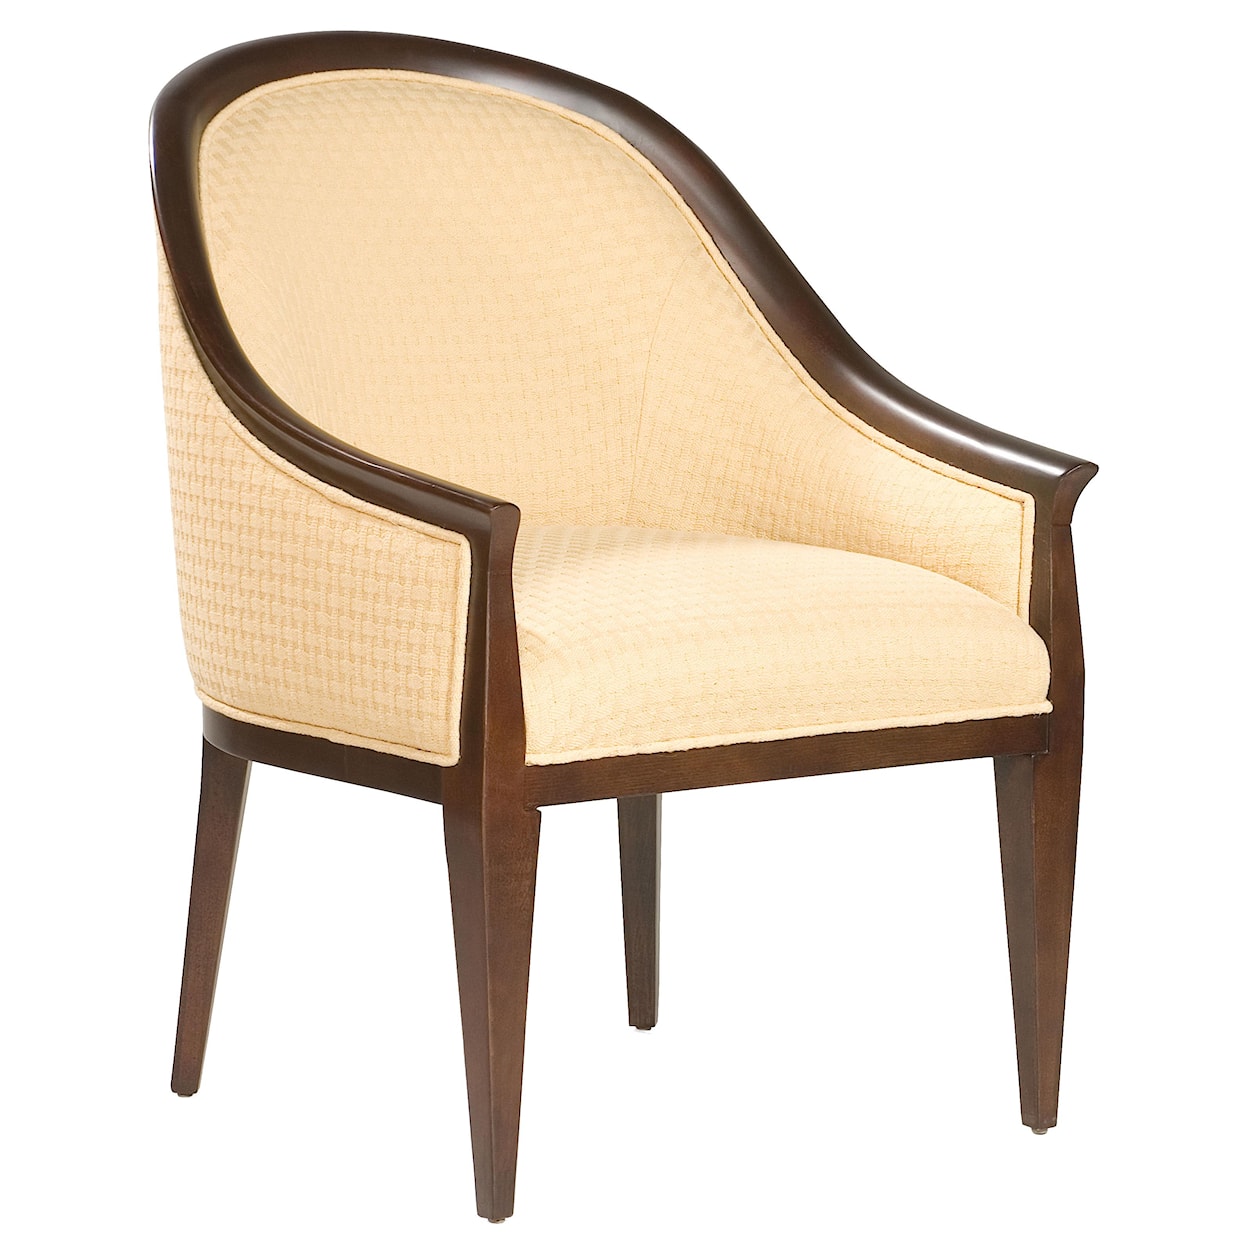 Fairfield Chairs Sophisticated Lounge Chair